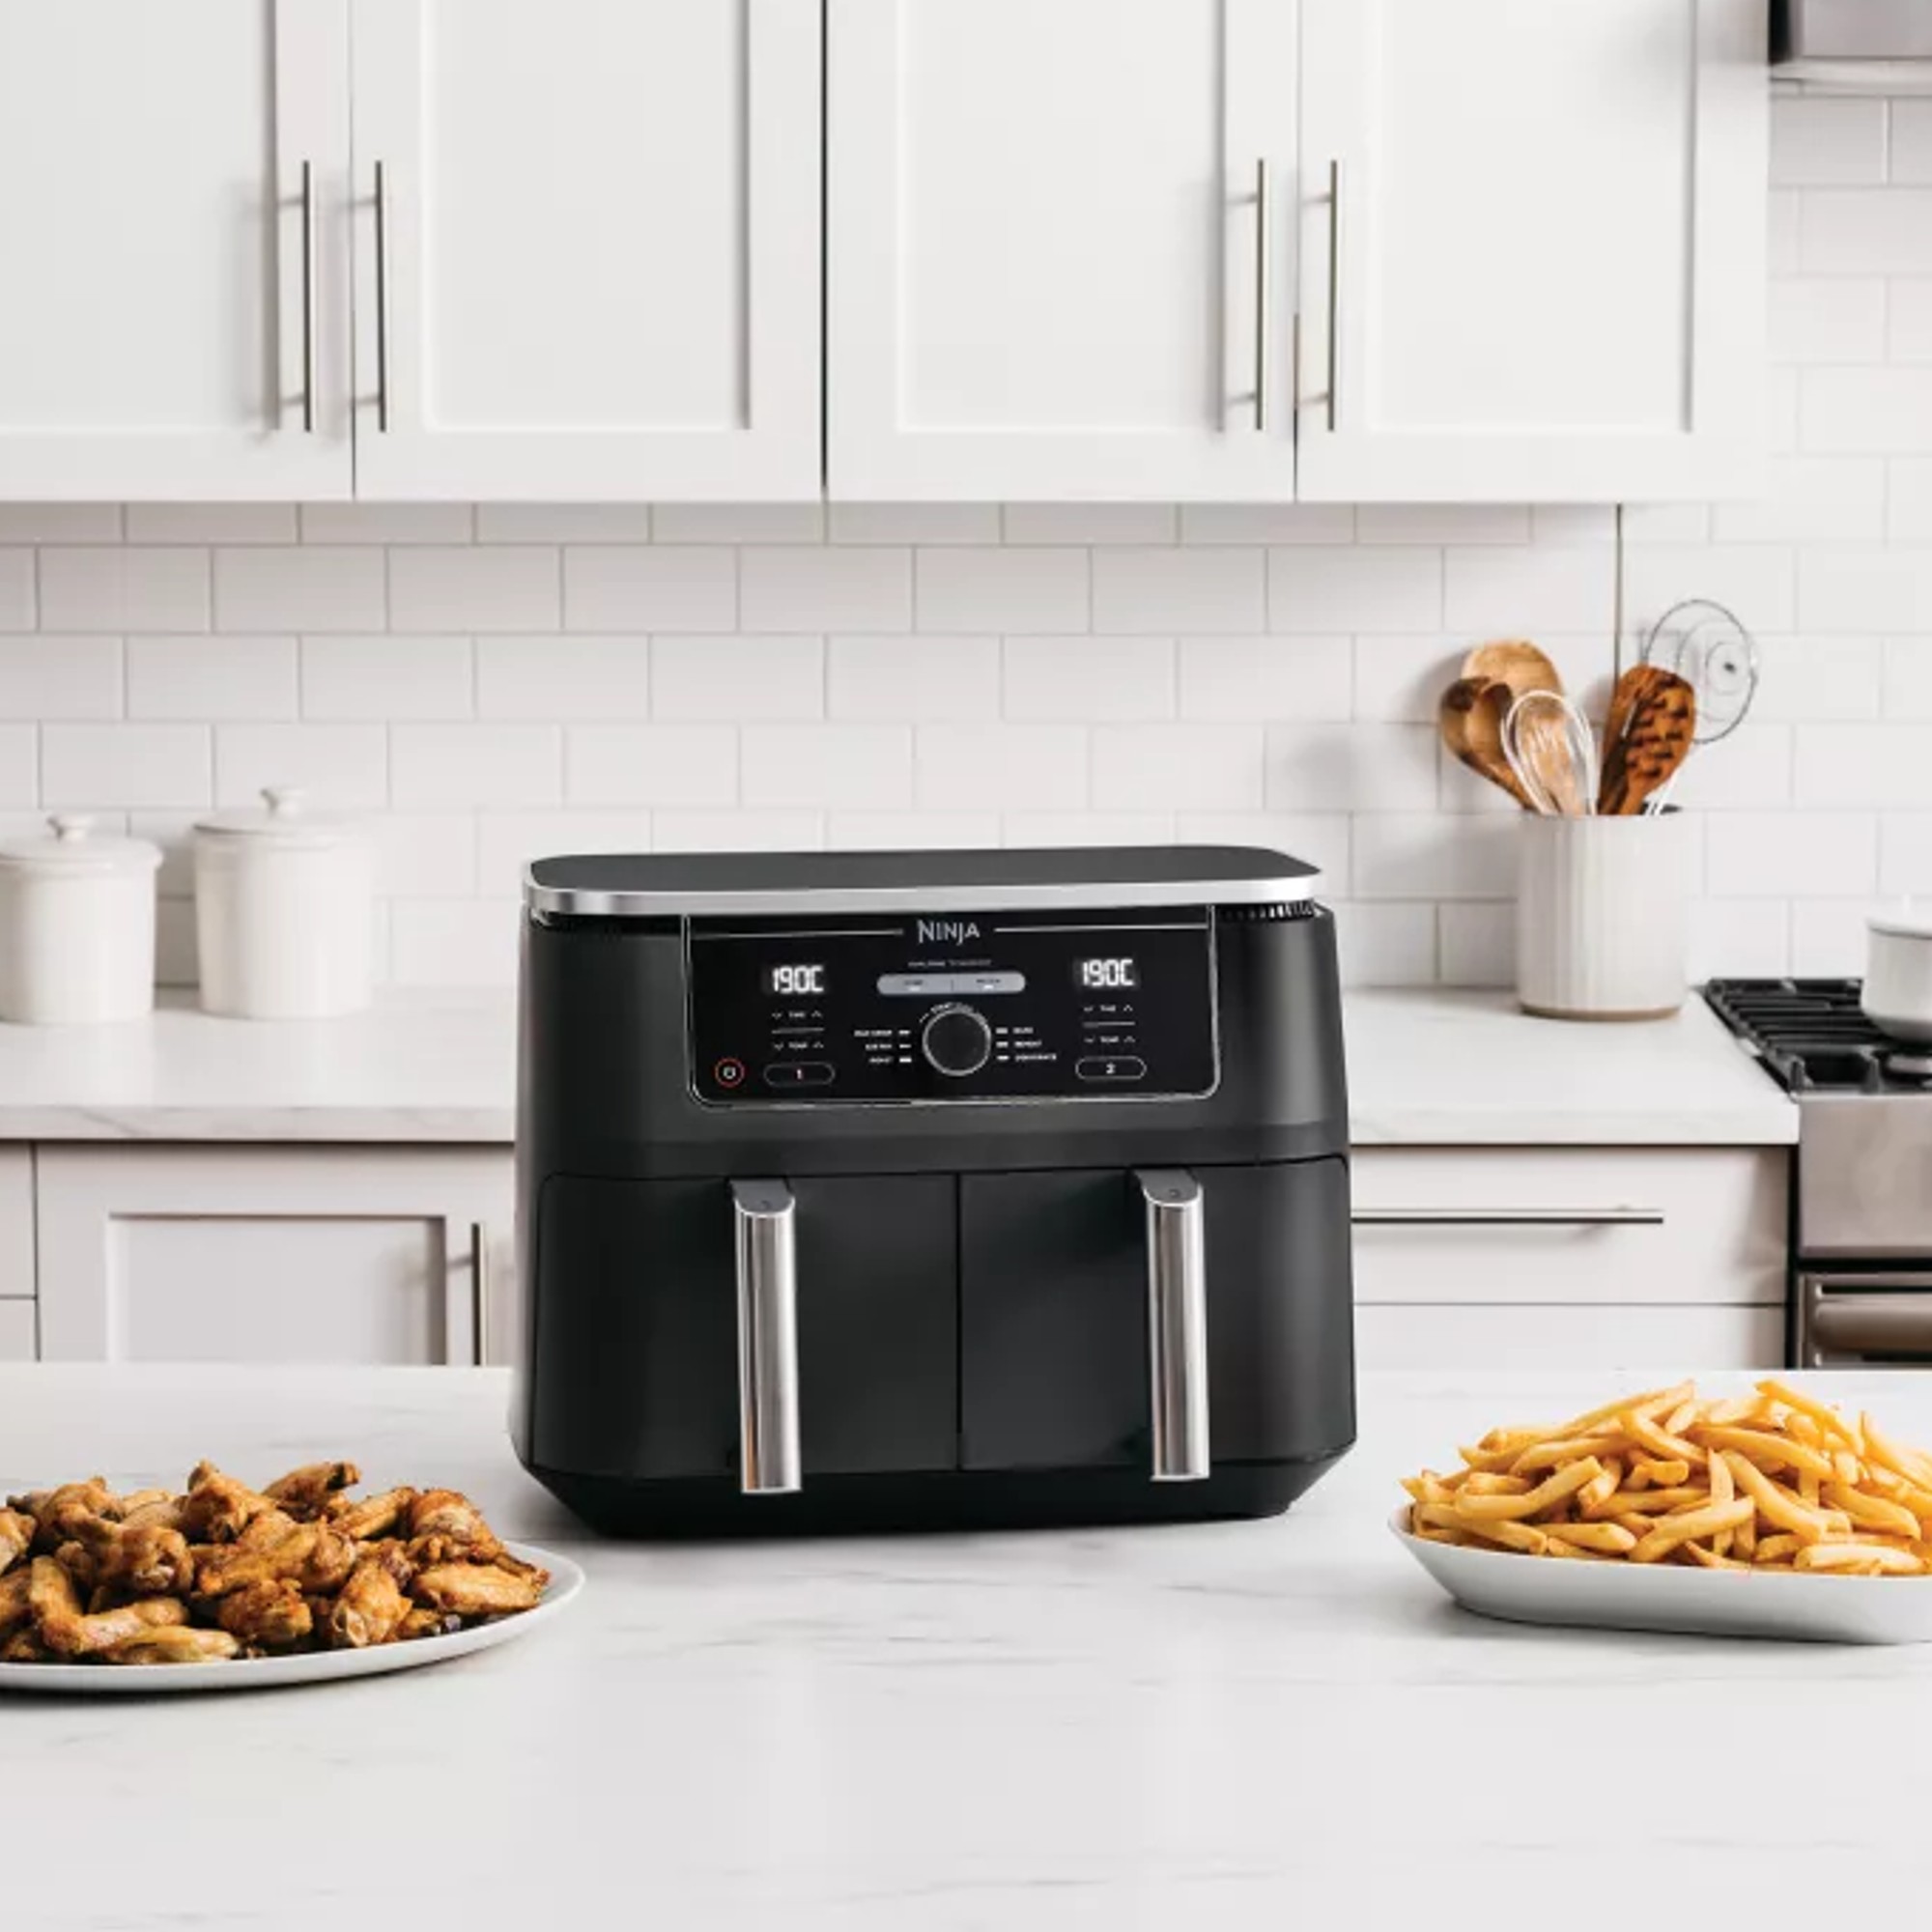 Is your air fryer toxic? Which brand do you use? #airfryer